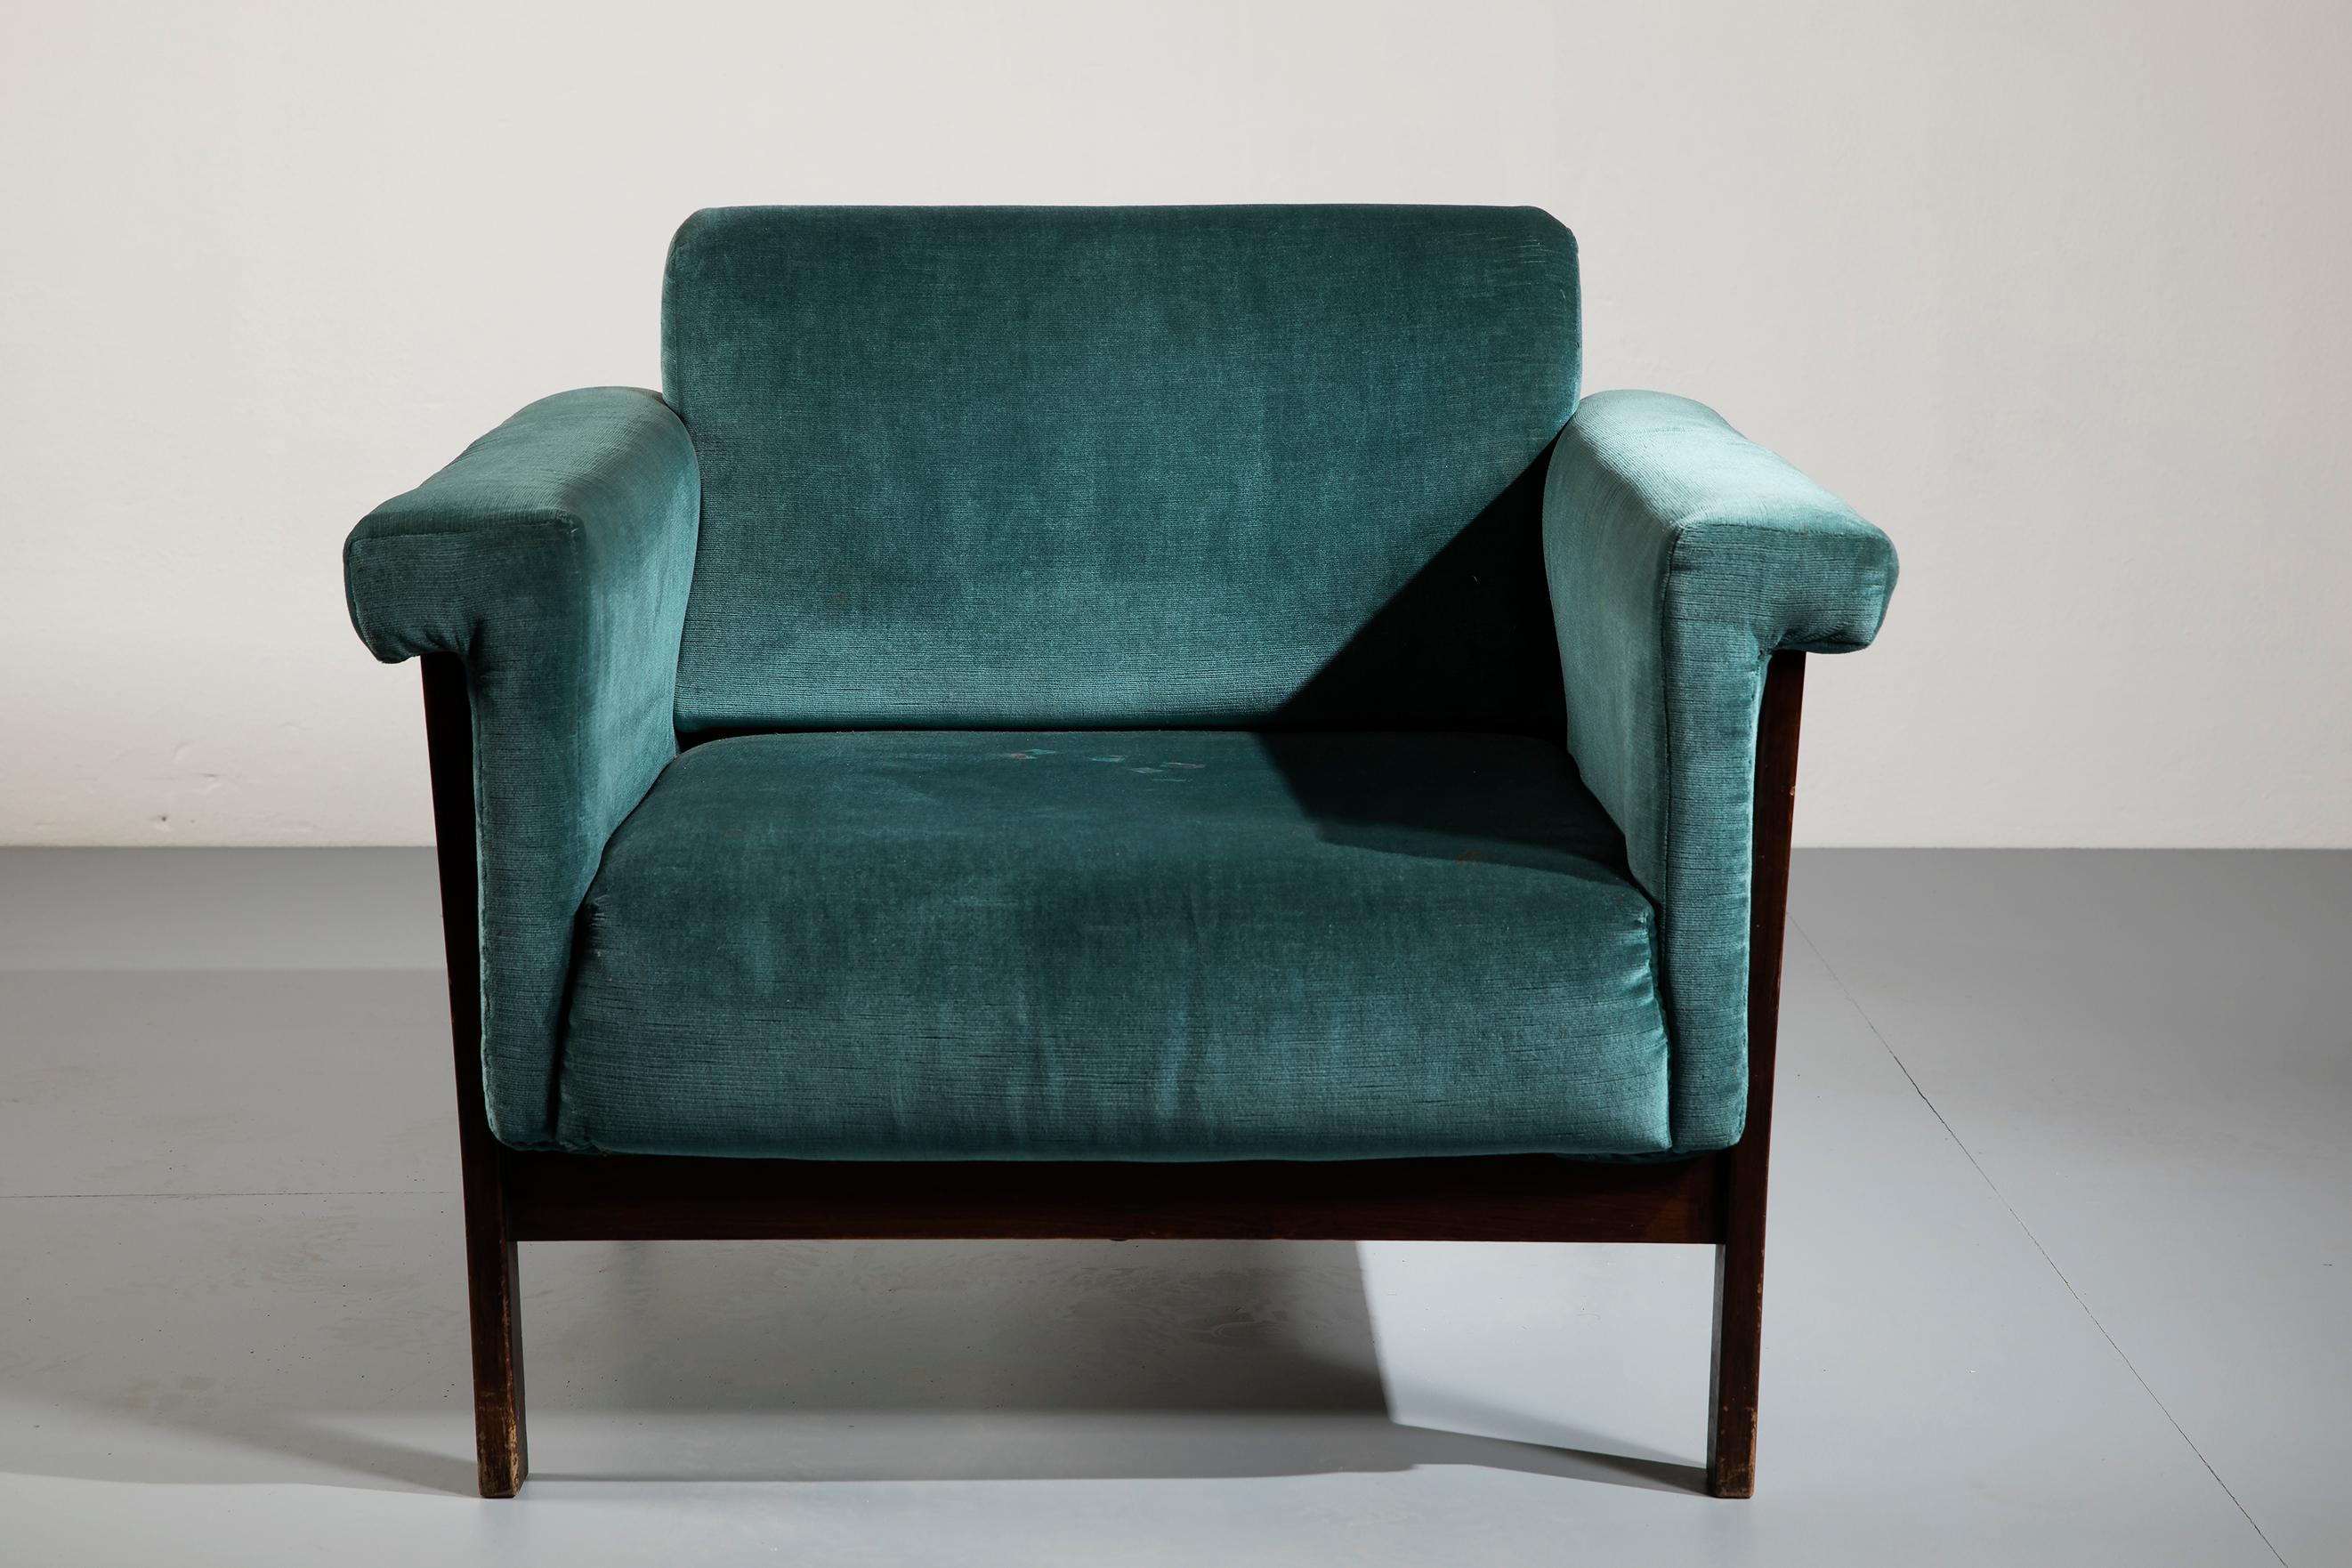 Ettore Sottsass Rosewood and Teal Fabric 'Canada' Armchair for Poltronova, 1958 In Good Condition For Sale In Firenze, IT